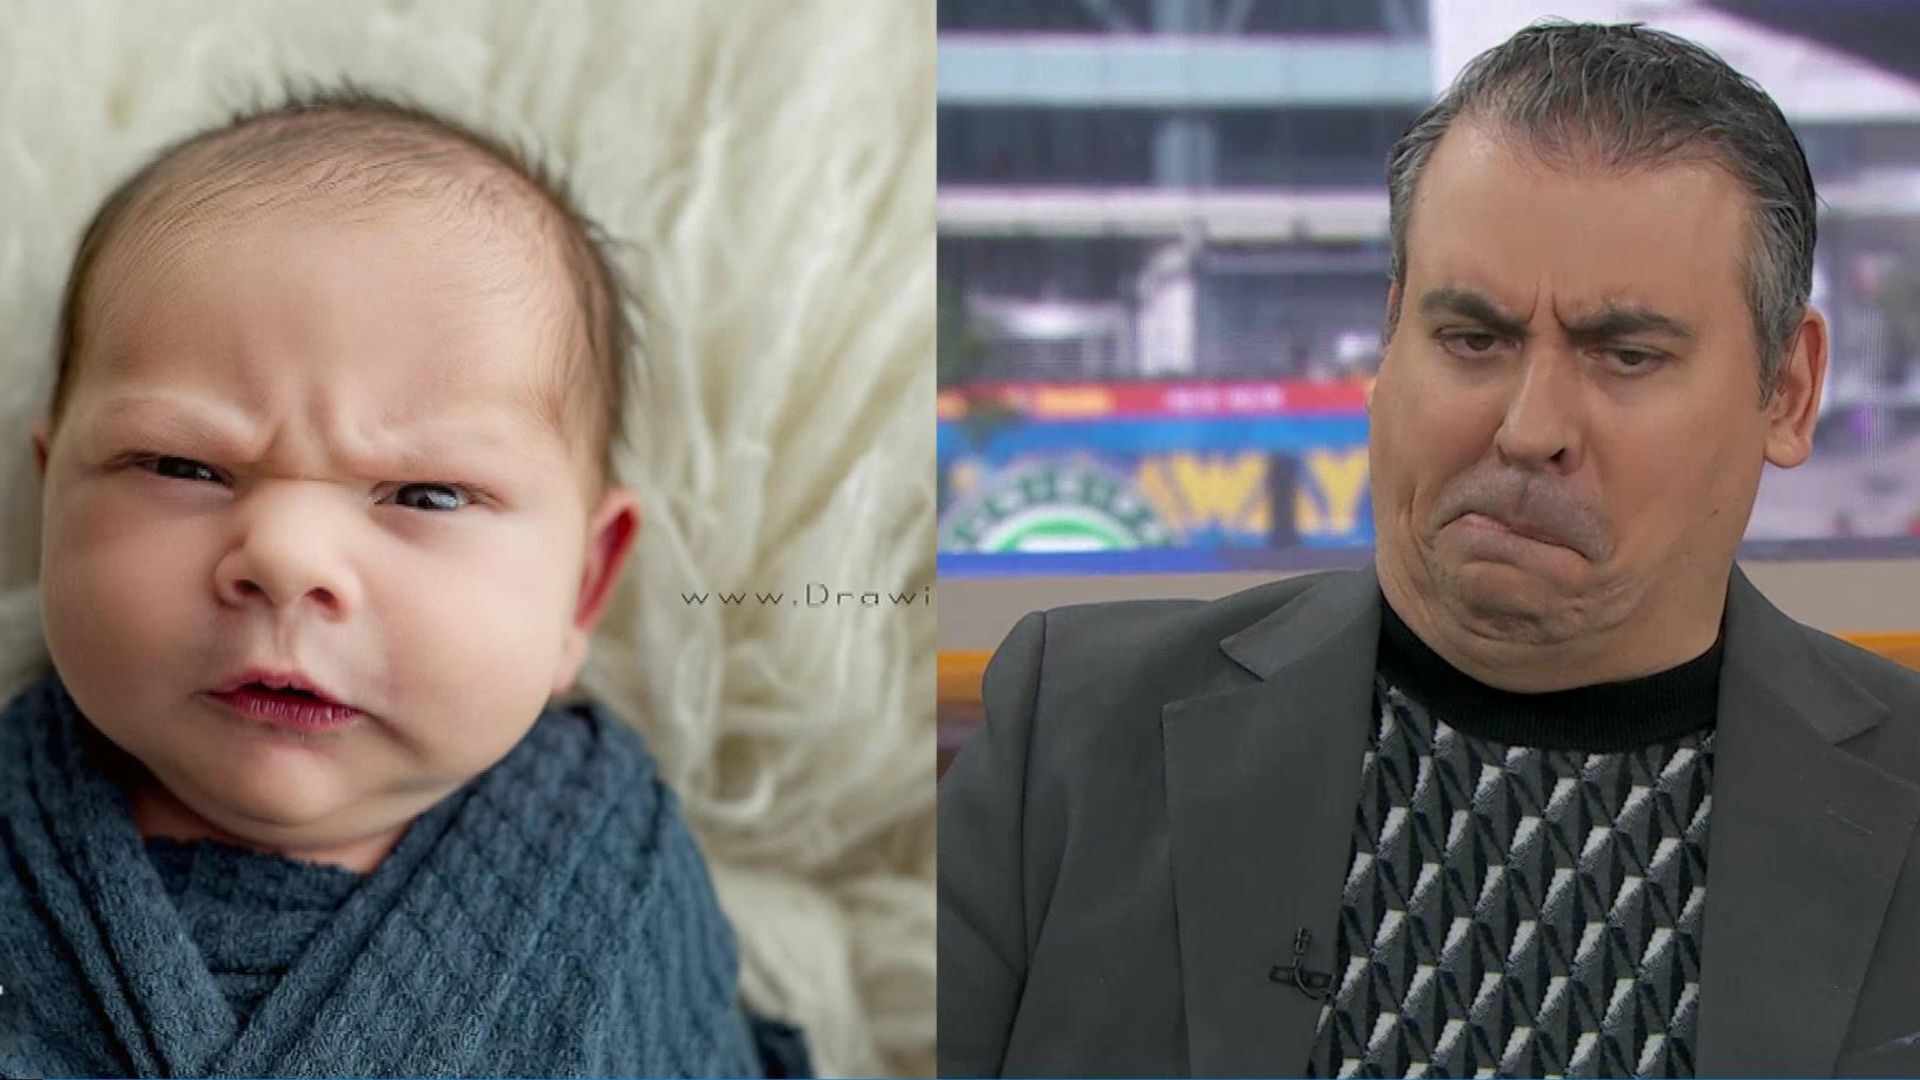 Who has the better grumpy face — Sid or this baby?